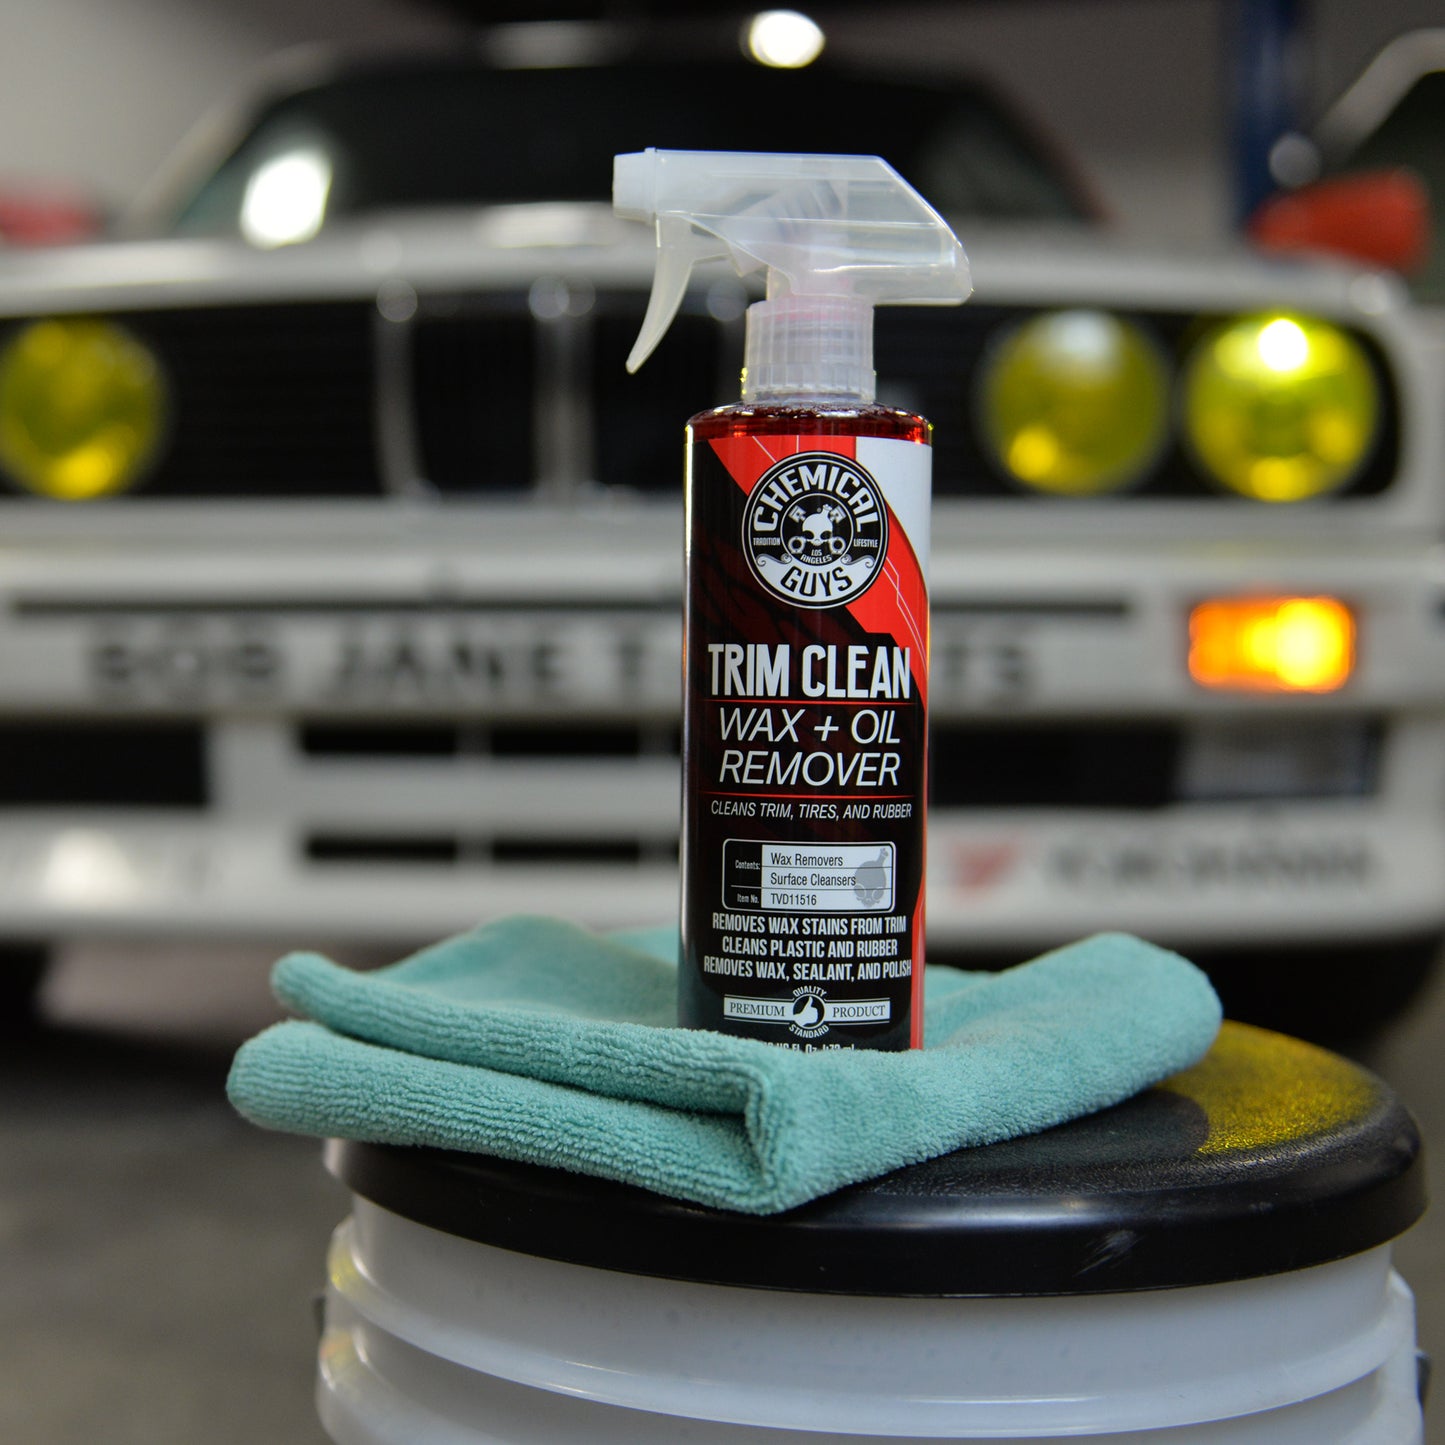 Trim Clean Wax and Oil Remover